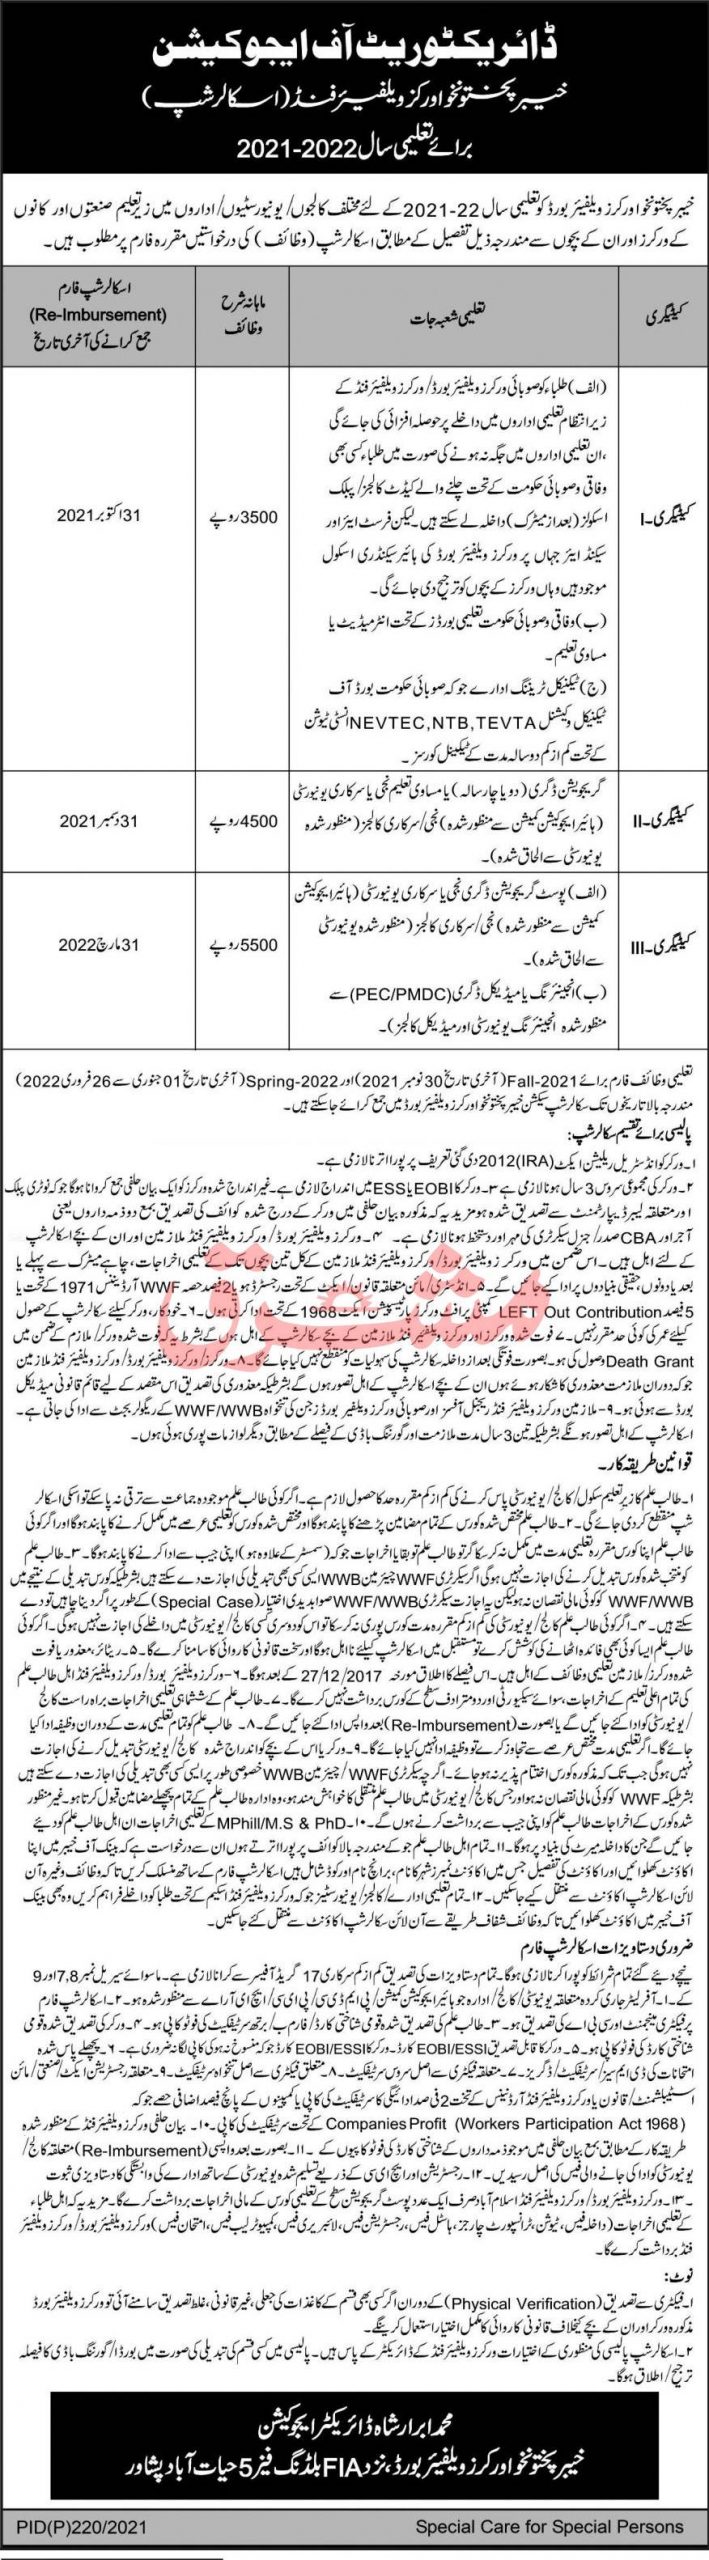 Directorate of Education Khyber Pakhtunkhwa Workers Welfare Fund Scholarships 2021